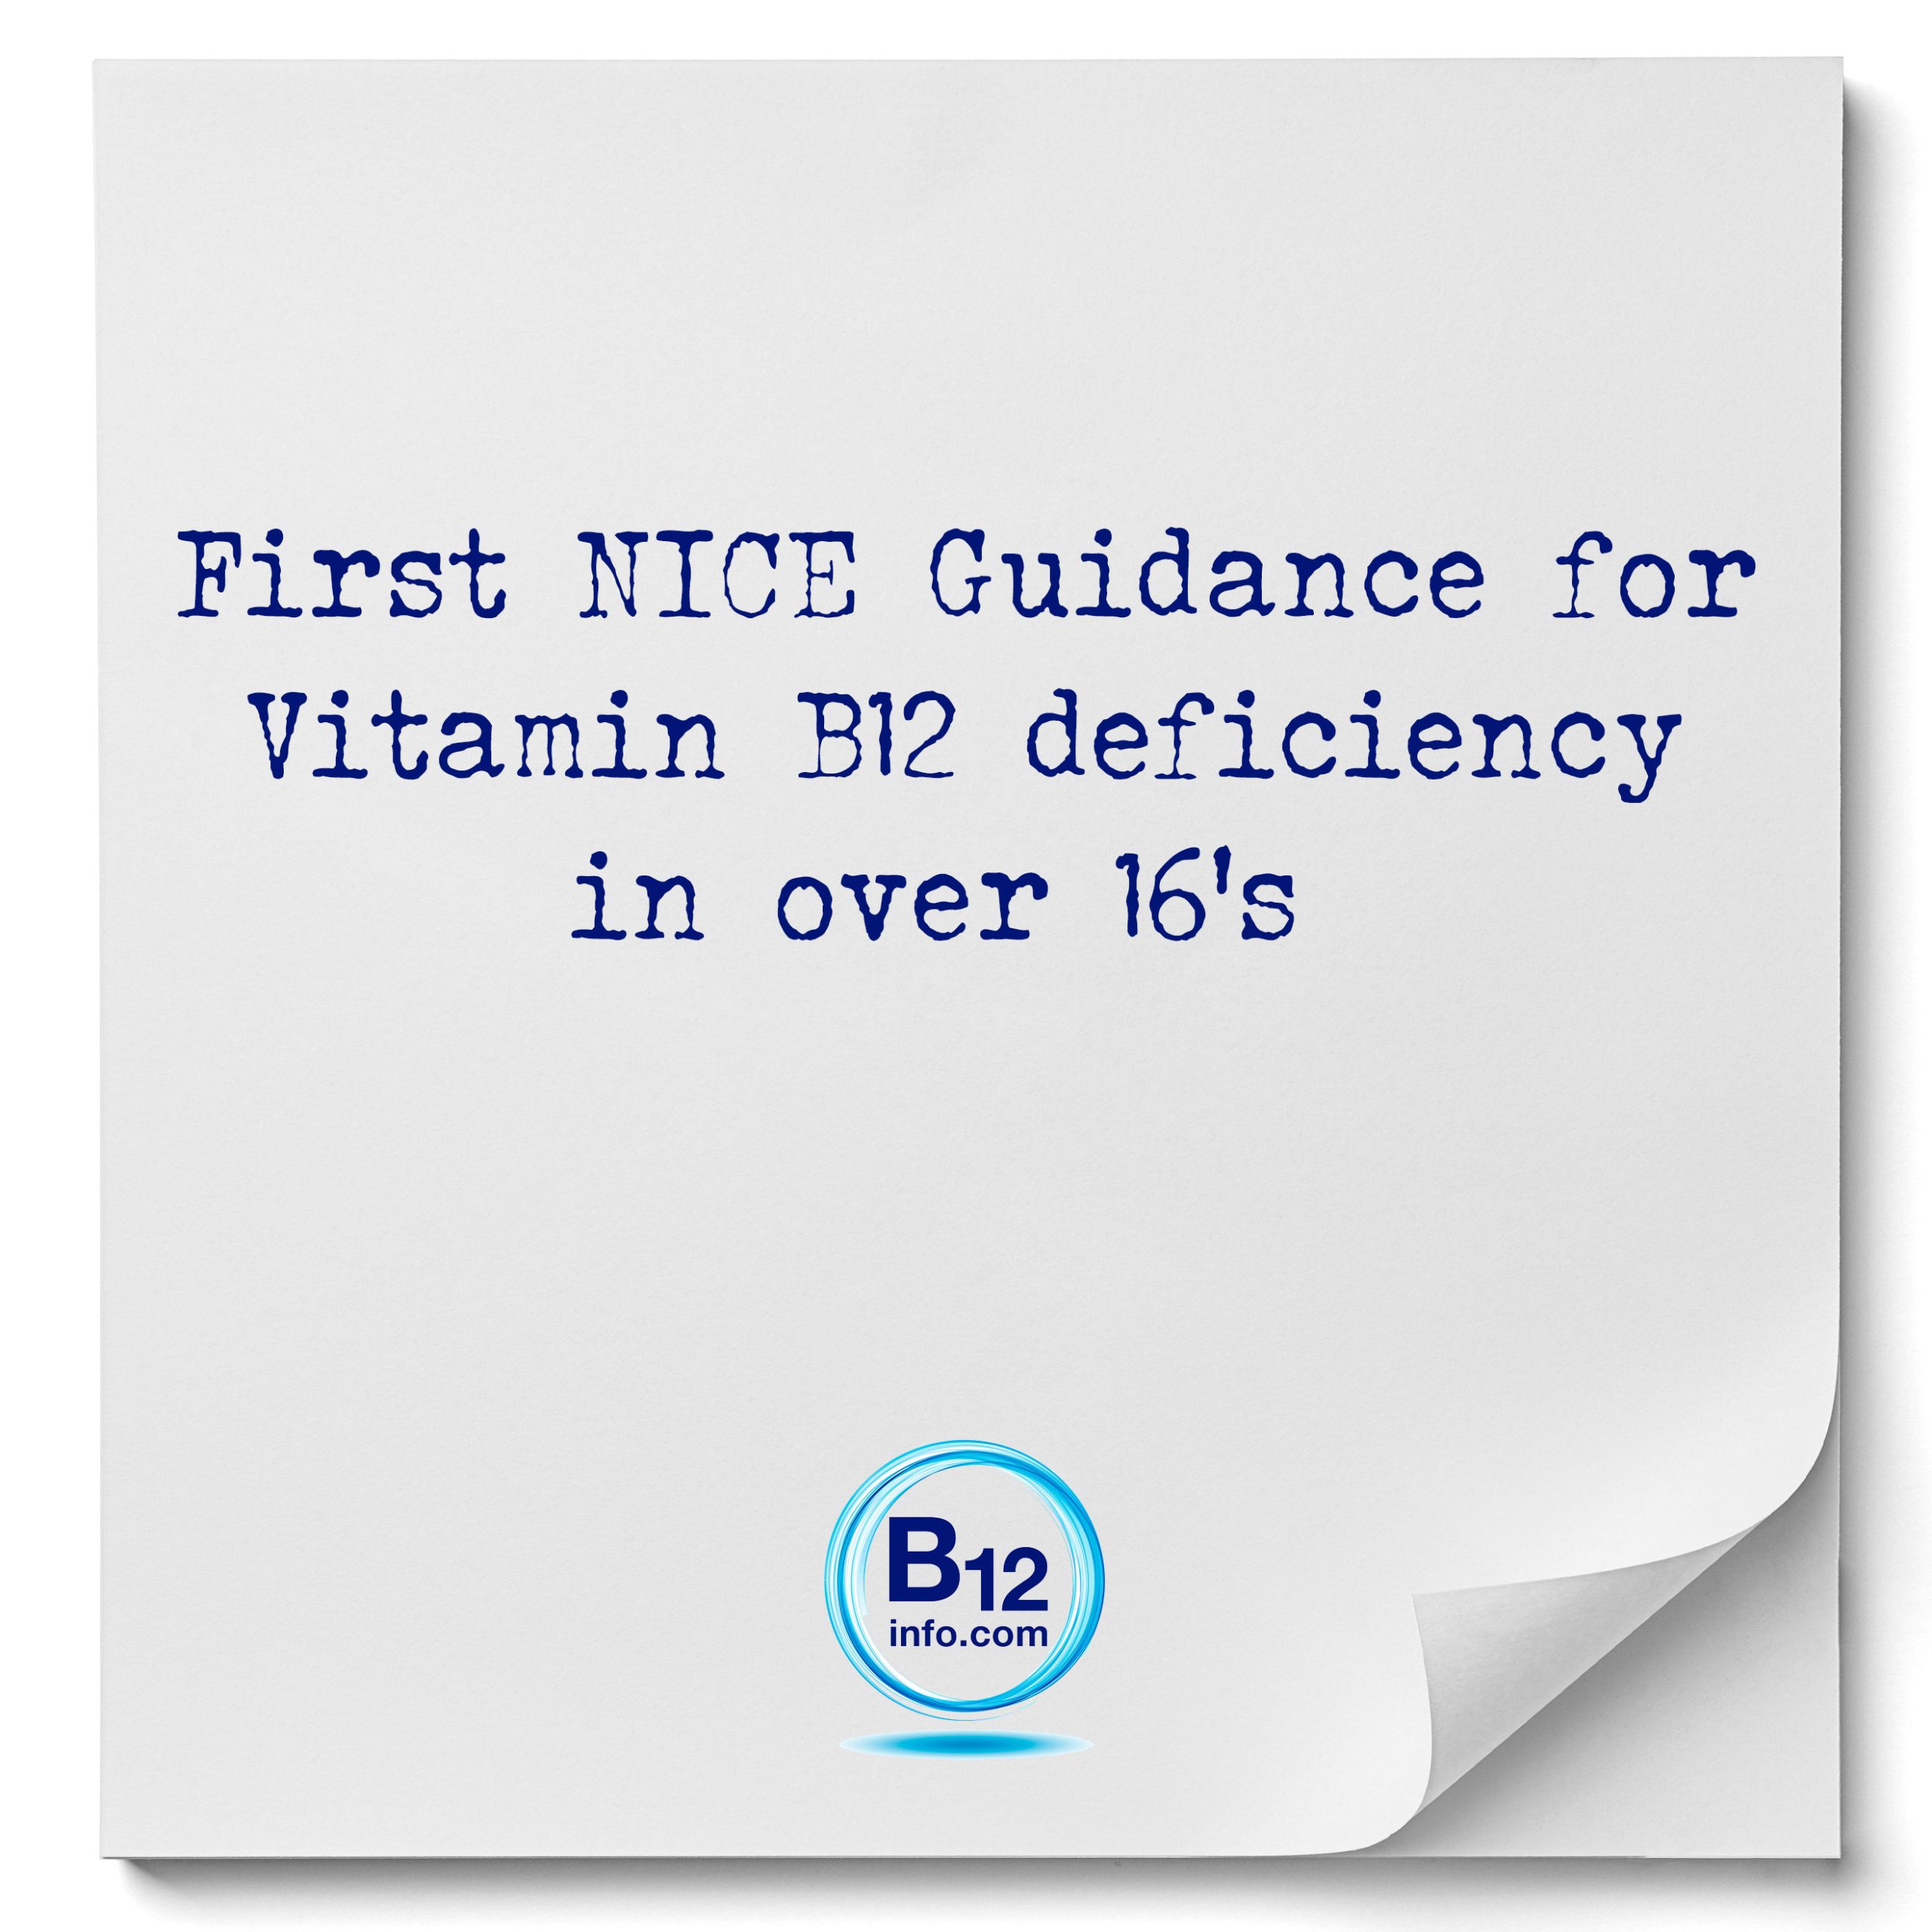 First NICE Guidance for B12 deficiency in over 16’s